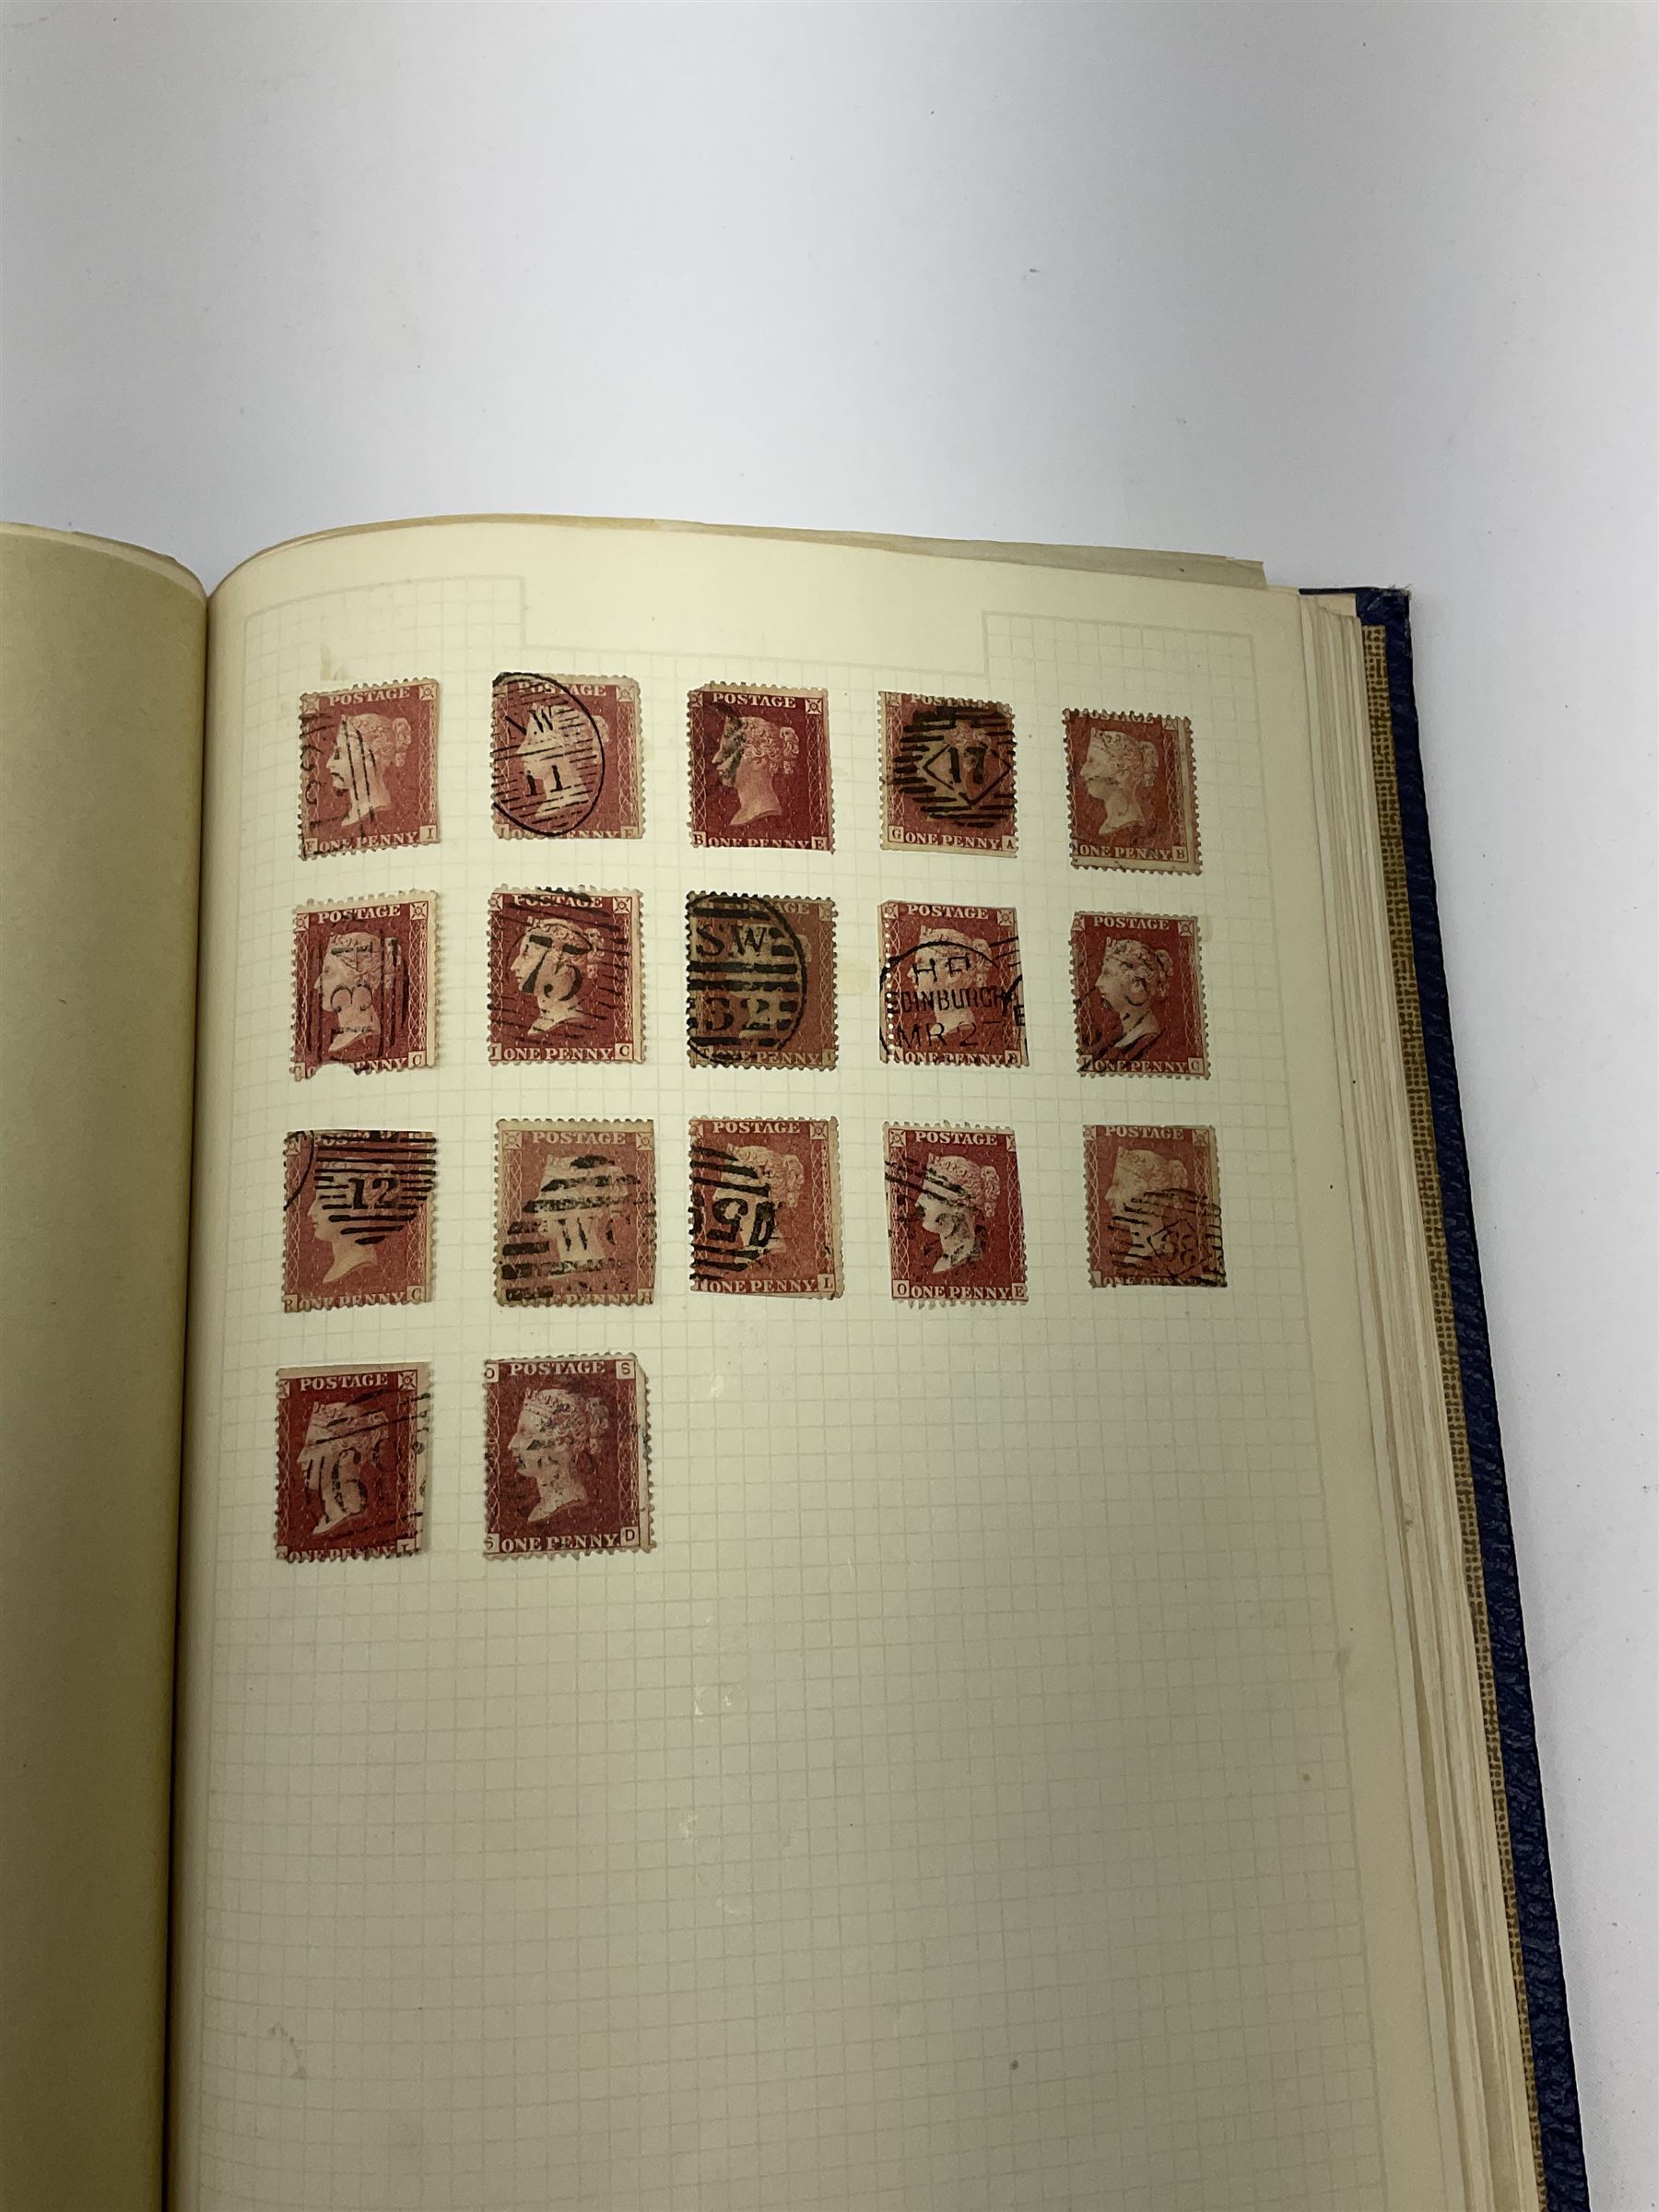 Great British Queen Victoria and later stamps including imperf penny reds with a few MX cancel examp - Image 4 of 9